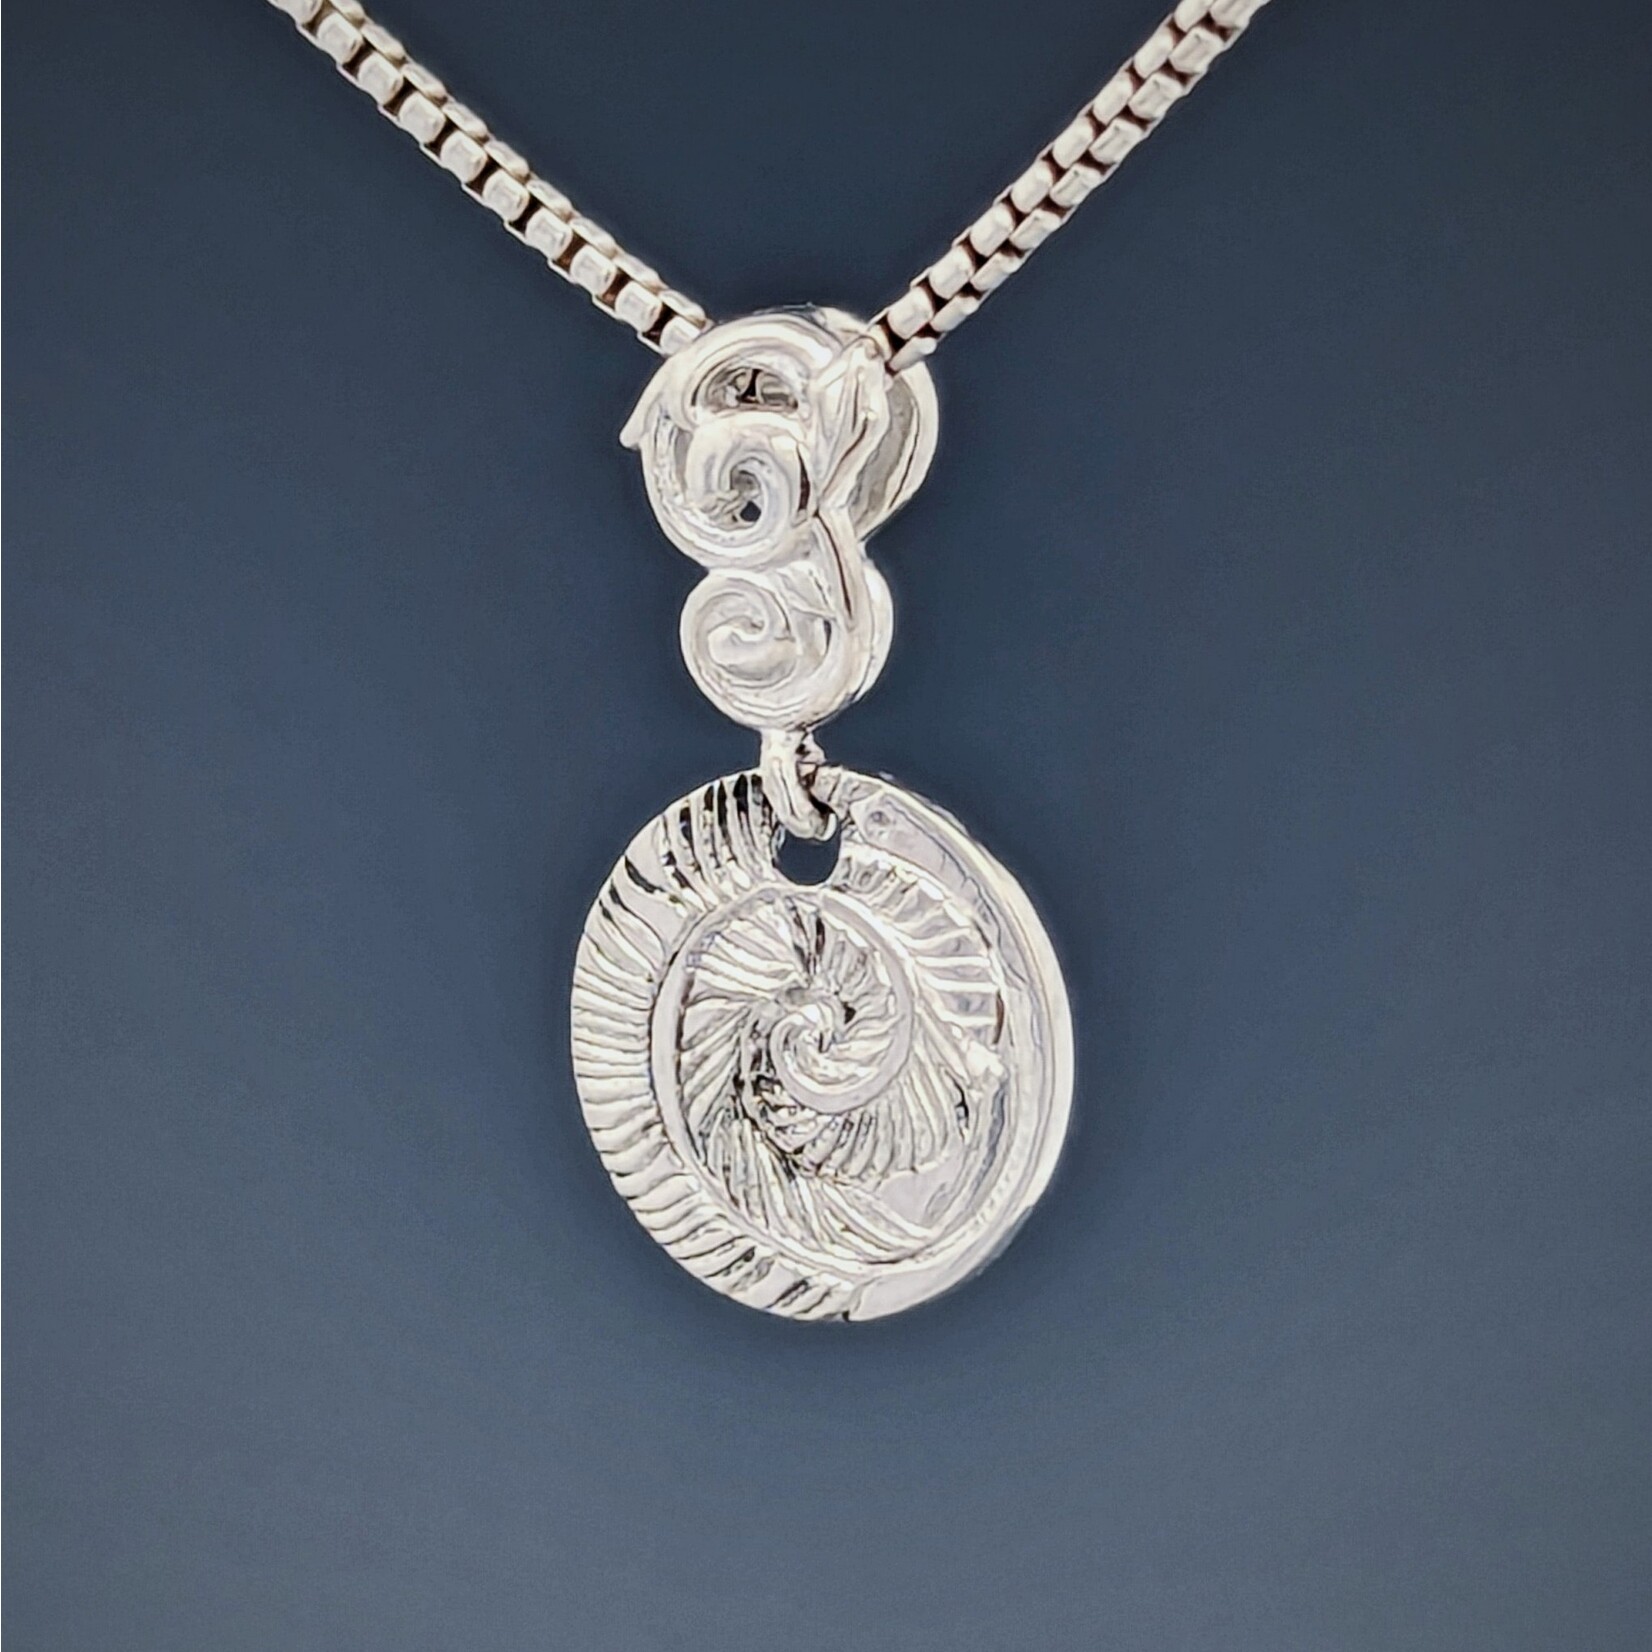 Modern Heirloom® Engraved Feather Micro-Medallion